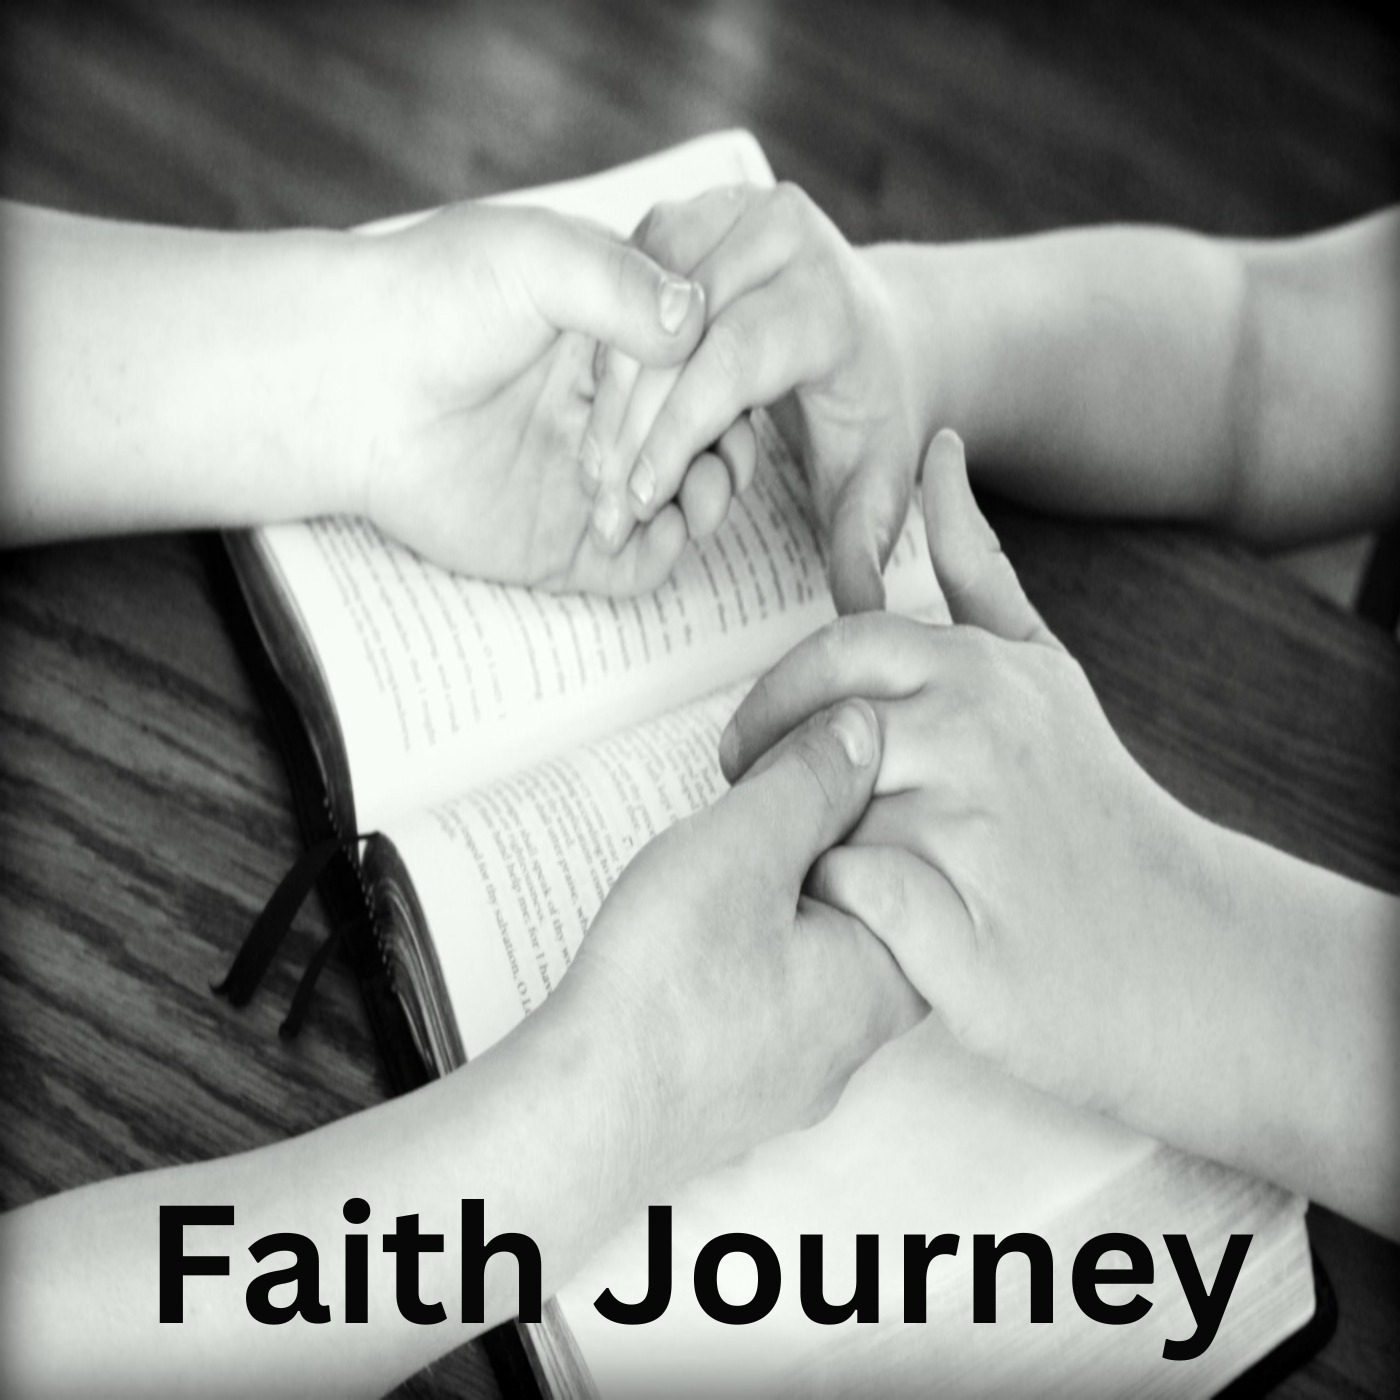 Yours Adult Childs "Faith Journey"